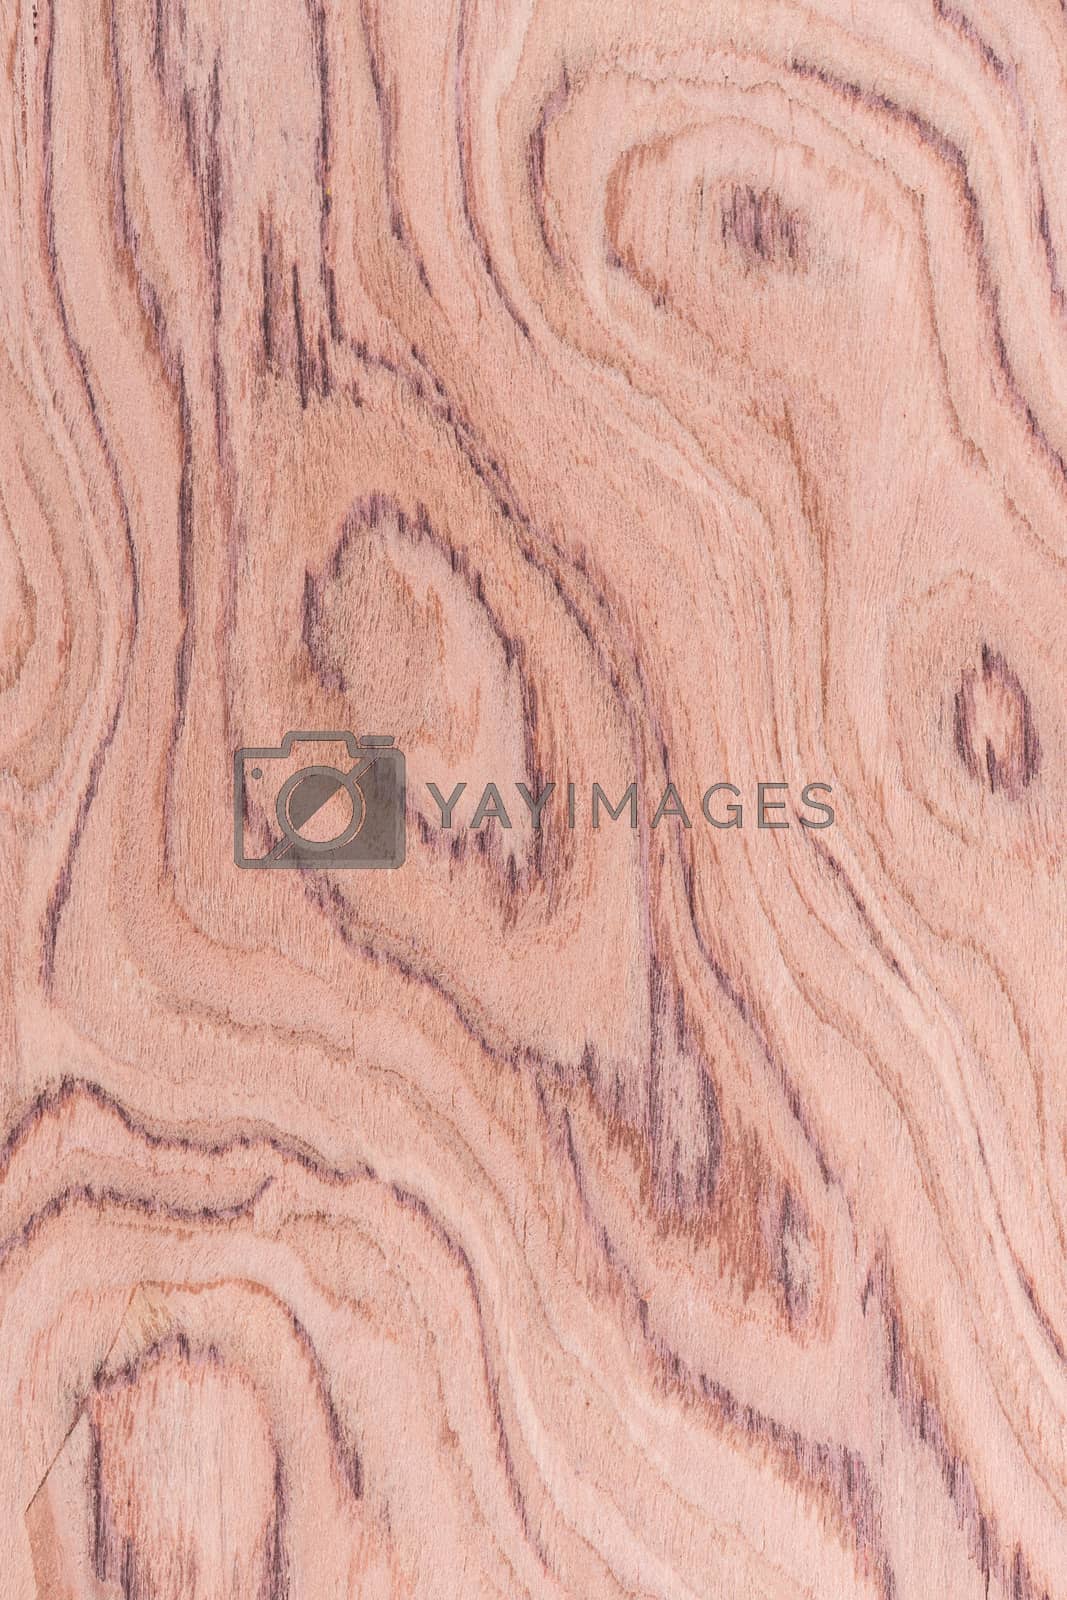 Royalty free image of Wood texture by jeonhae